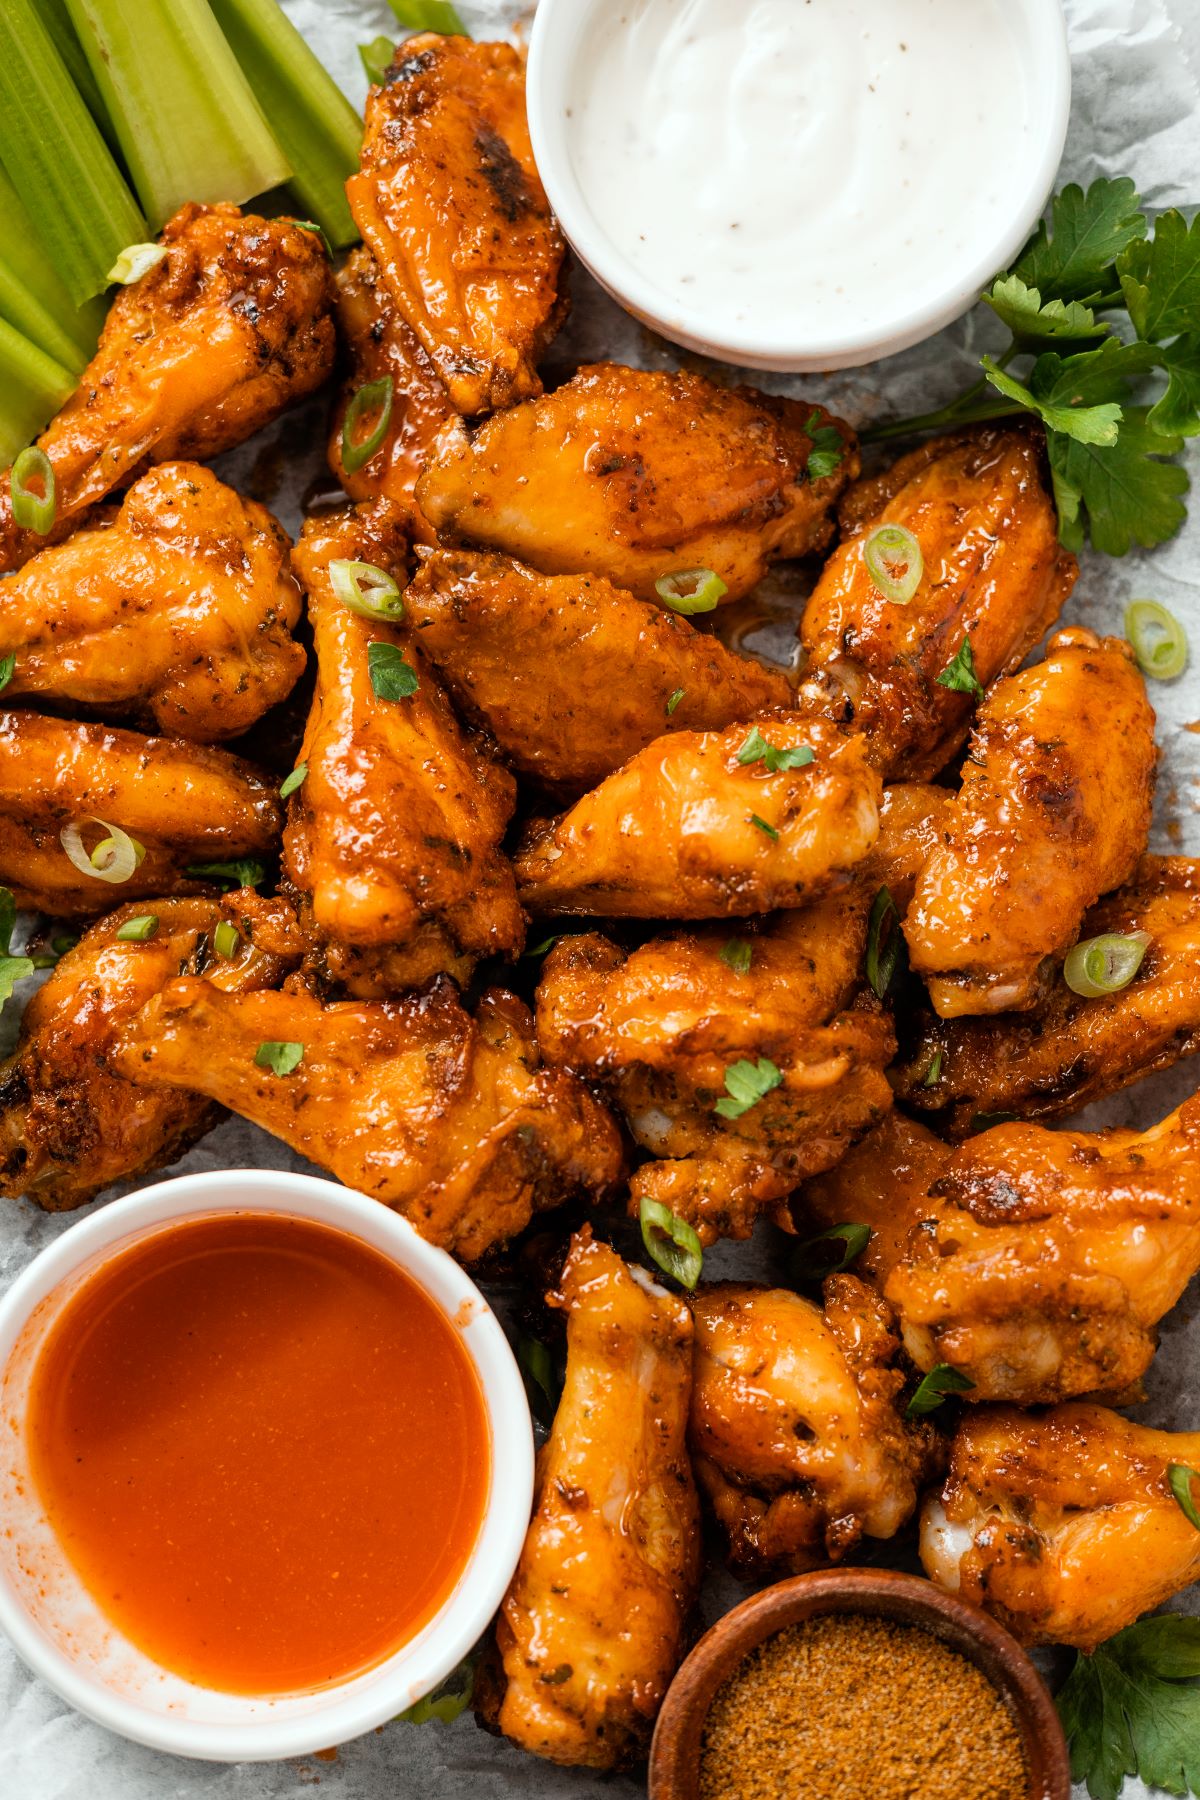 Hot Honey Old Bay Wings topped with green onions